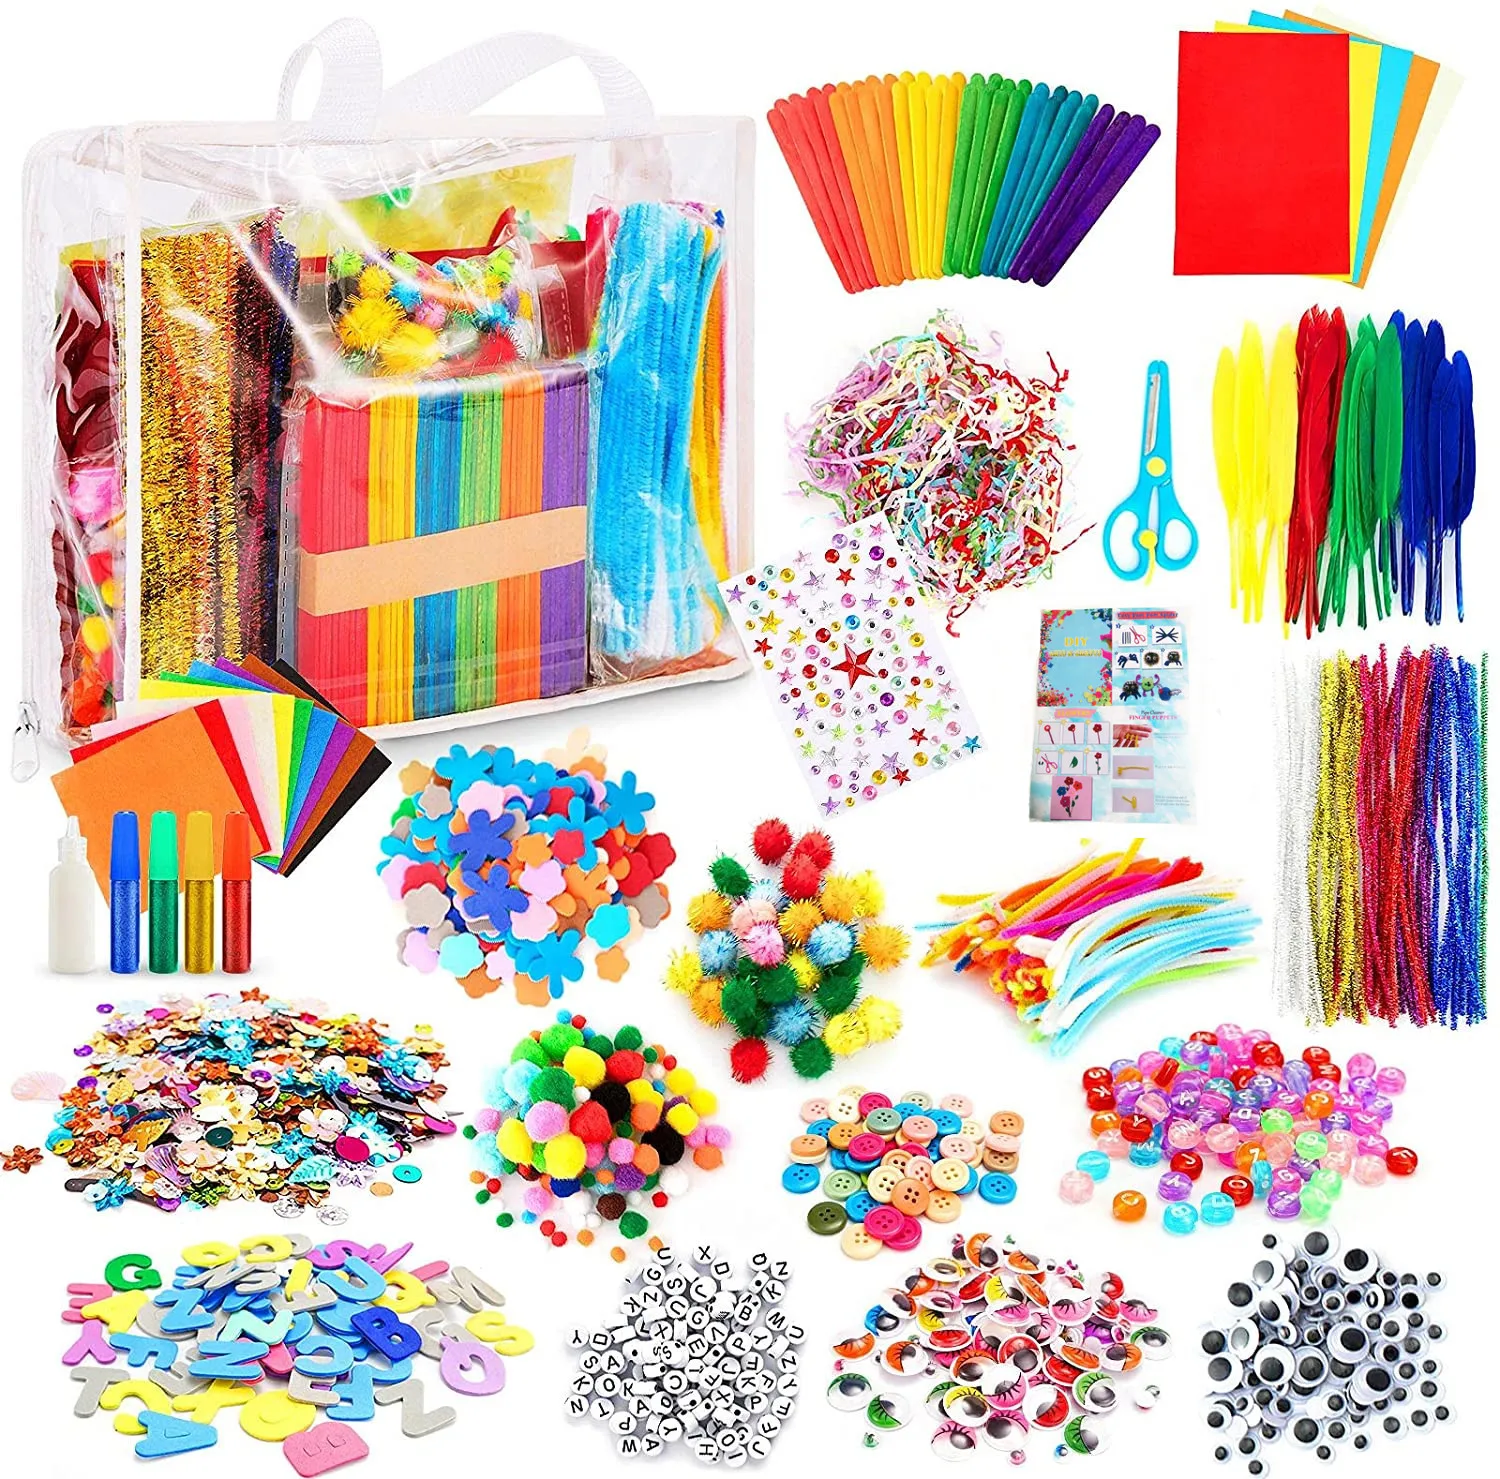 Arts And Crafts Supplies For Kids - Craft Art Supply Kit For Crafts Toddler  Activities Kids School Supplies - Buy Arts And Crafts Supplies For Kids - Craft  Art Supply Kit For